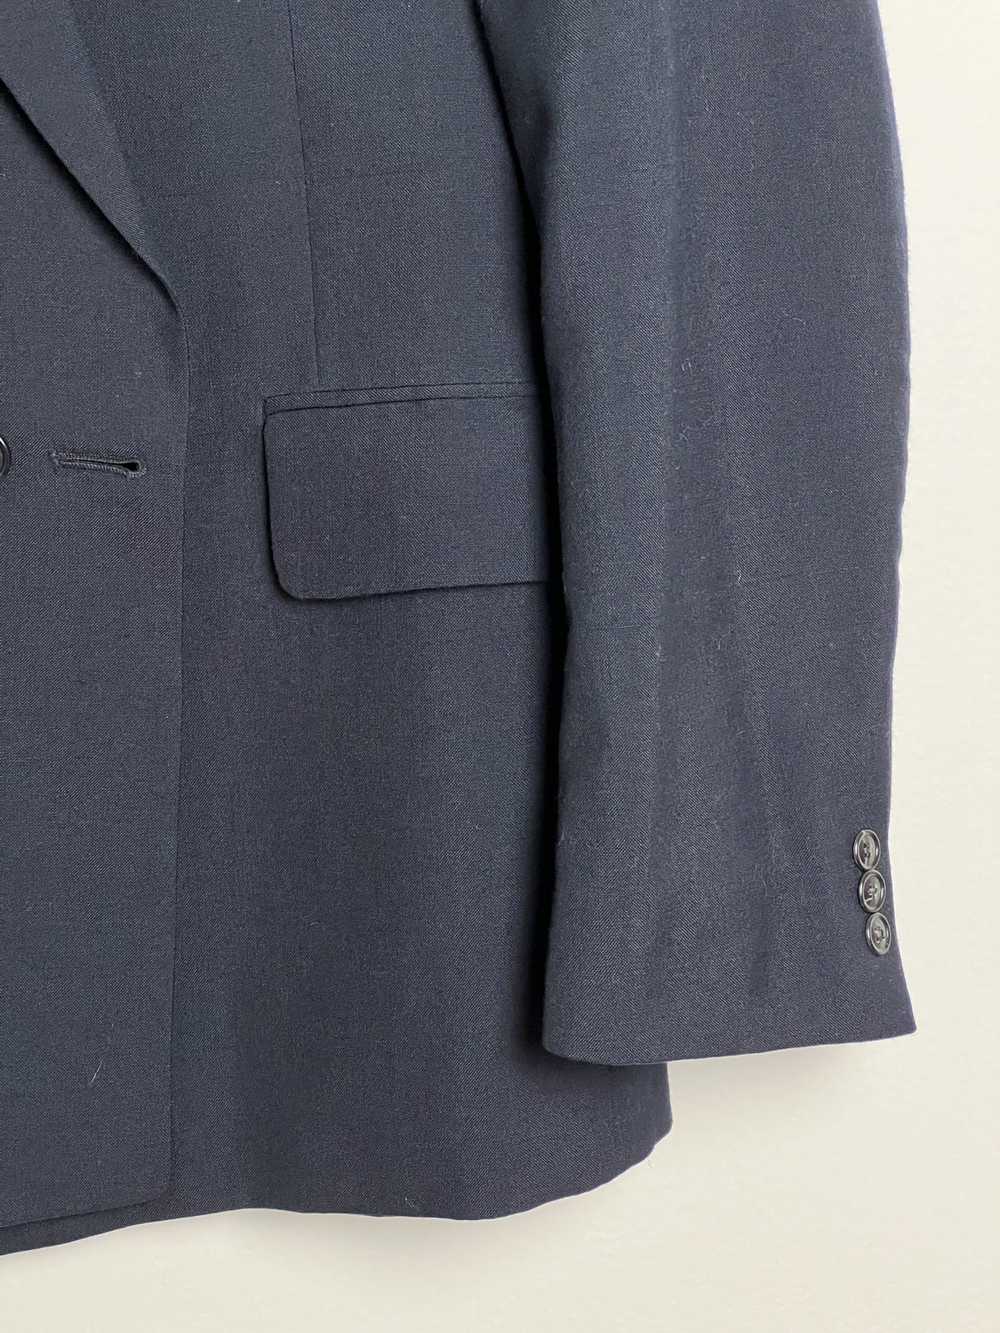 Vintage Navy Doubled Breasted Blazer - image 3